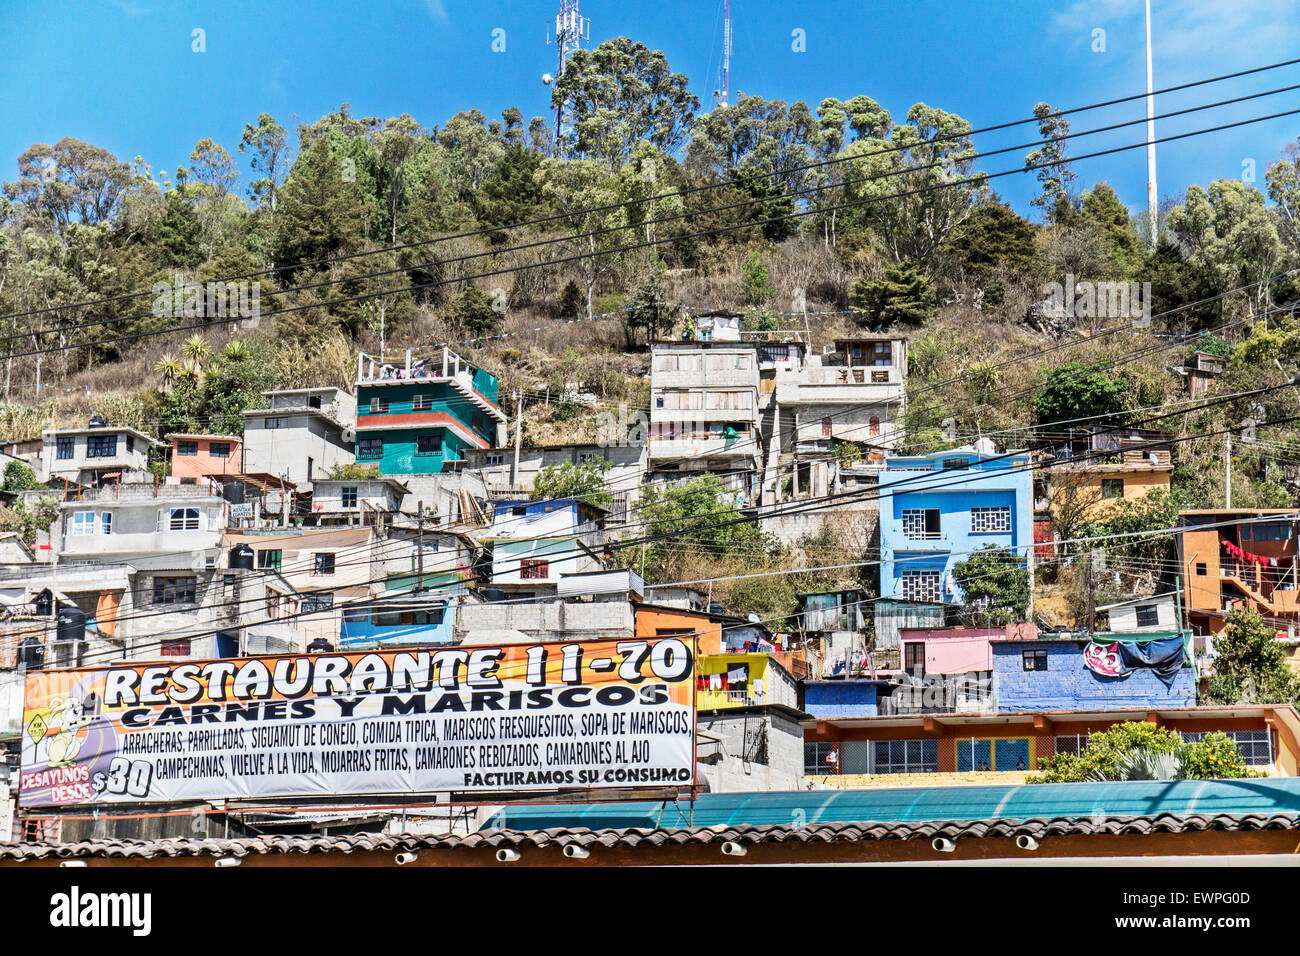 tightly clustered middle class homes cling to steep hillside above restaurant sign at street level in San Cristobal de las Casas Stock Photo